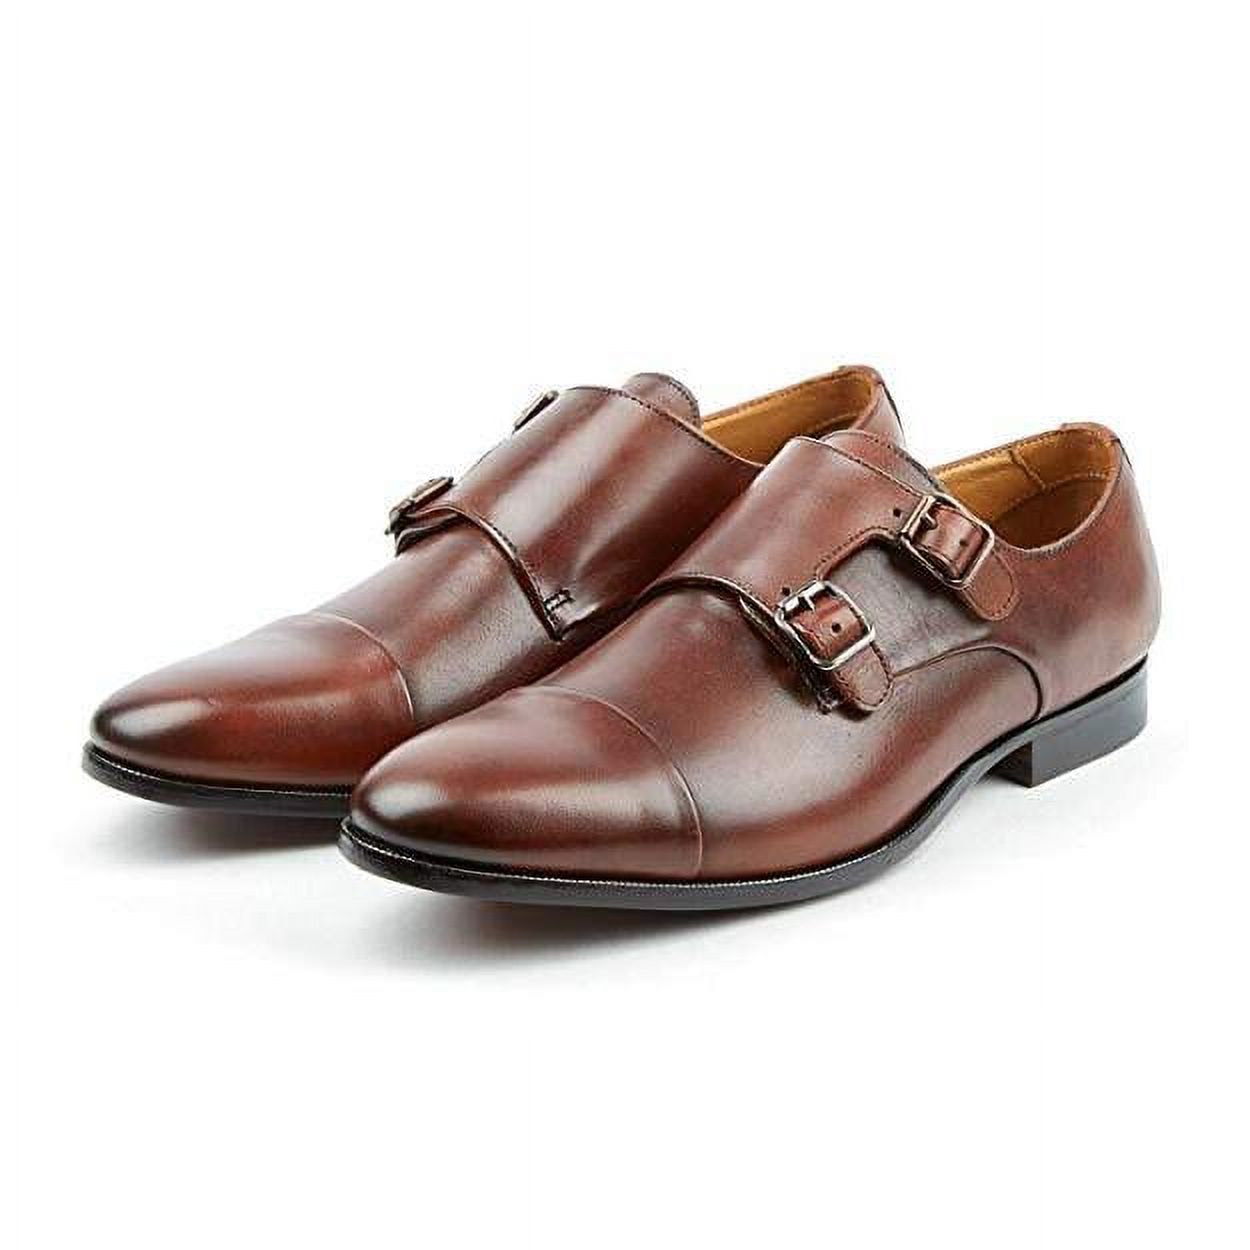 Pair Of Kings The Jack Brandy Leather Monk Casual Strap Buckle Dress Shoes (Brandy, 8) - image 1 of 2